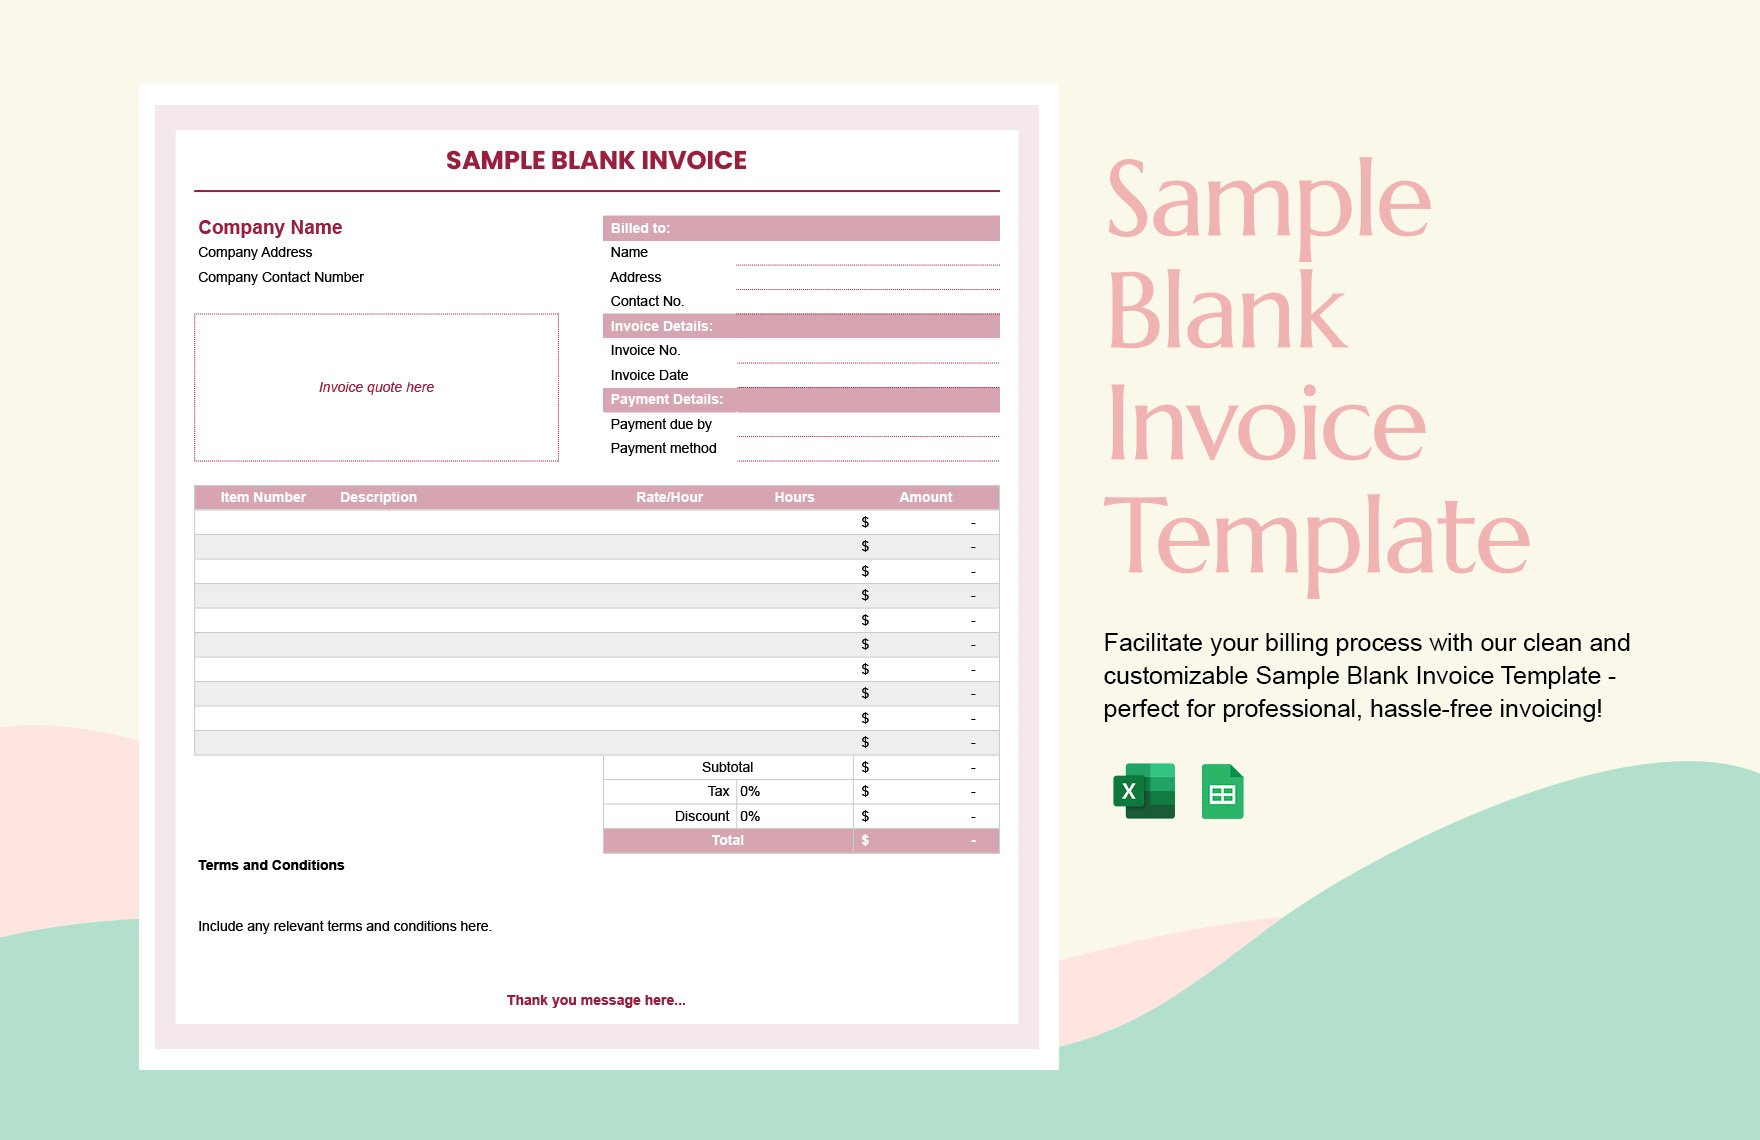 Free Sample Blank Invoice Template in Excel, Google Sheets